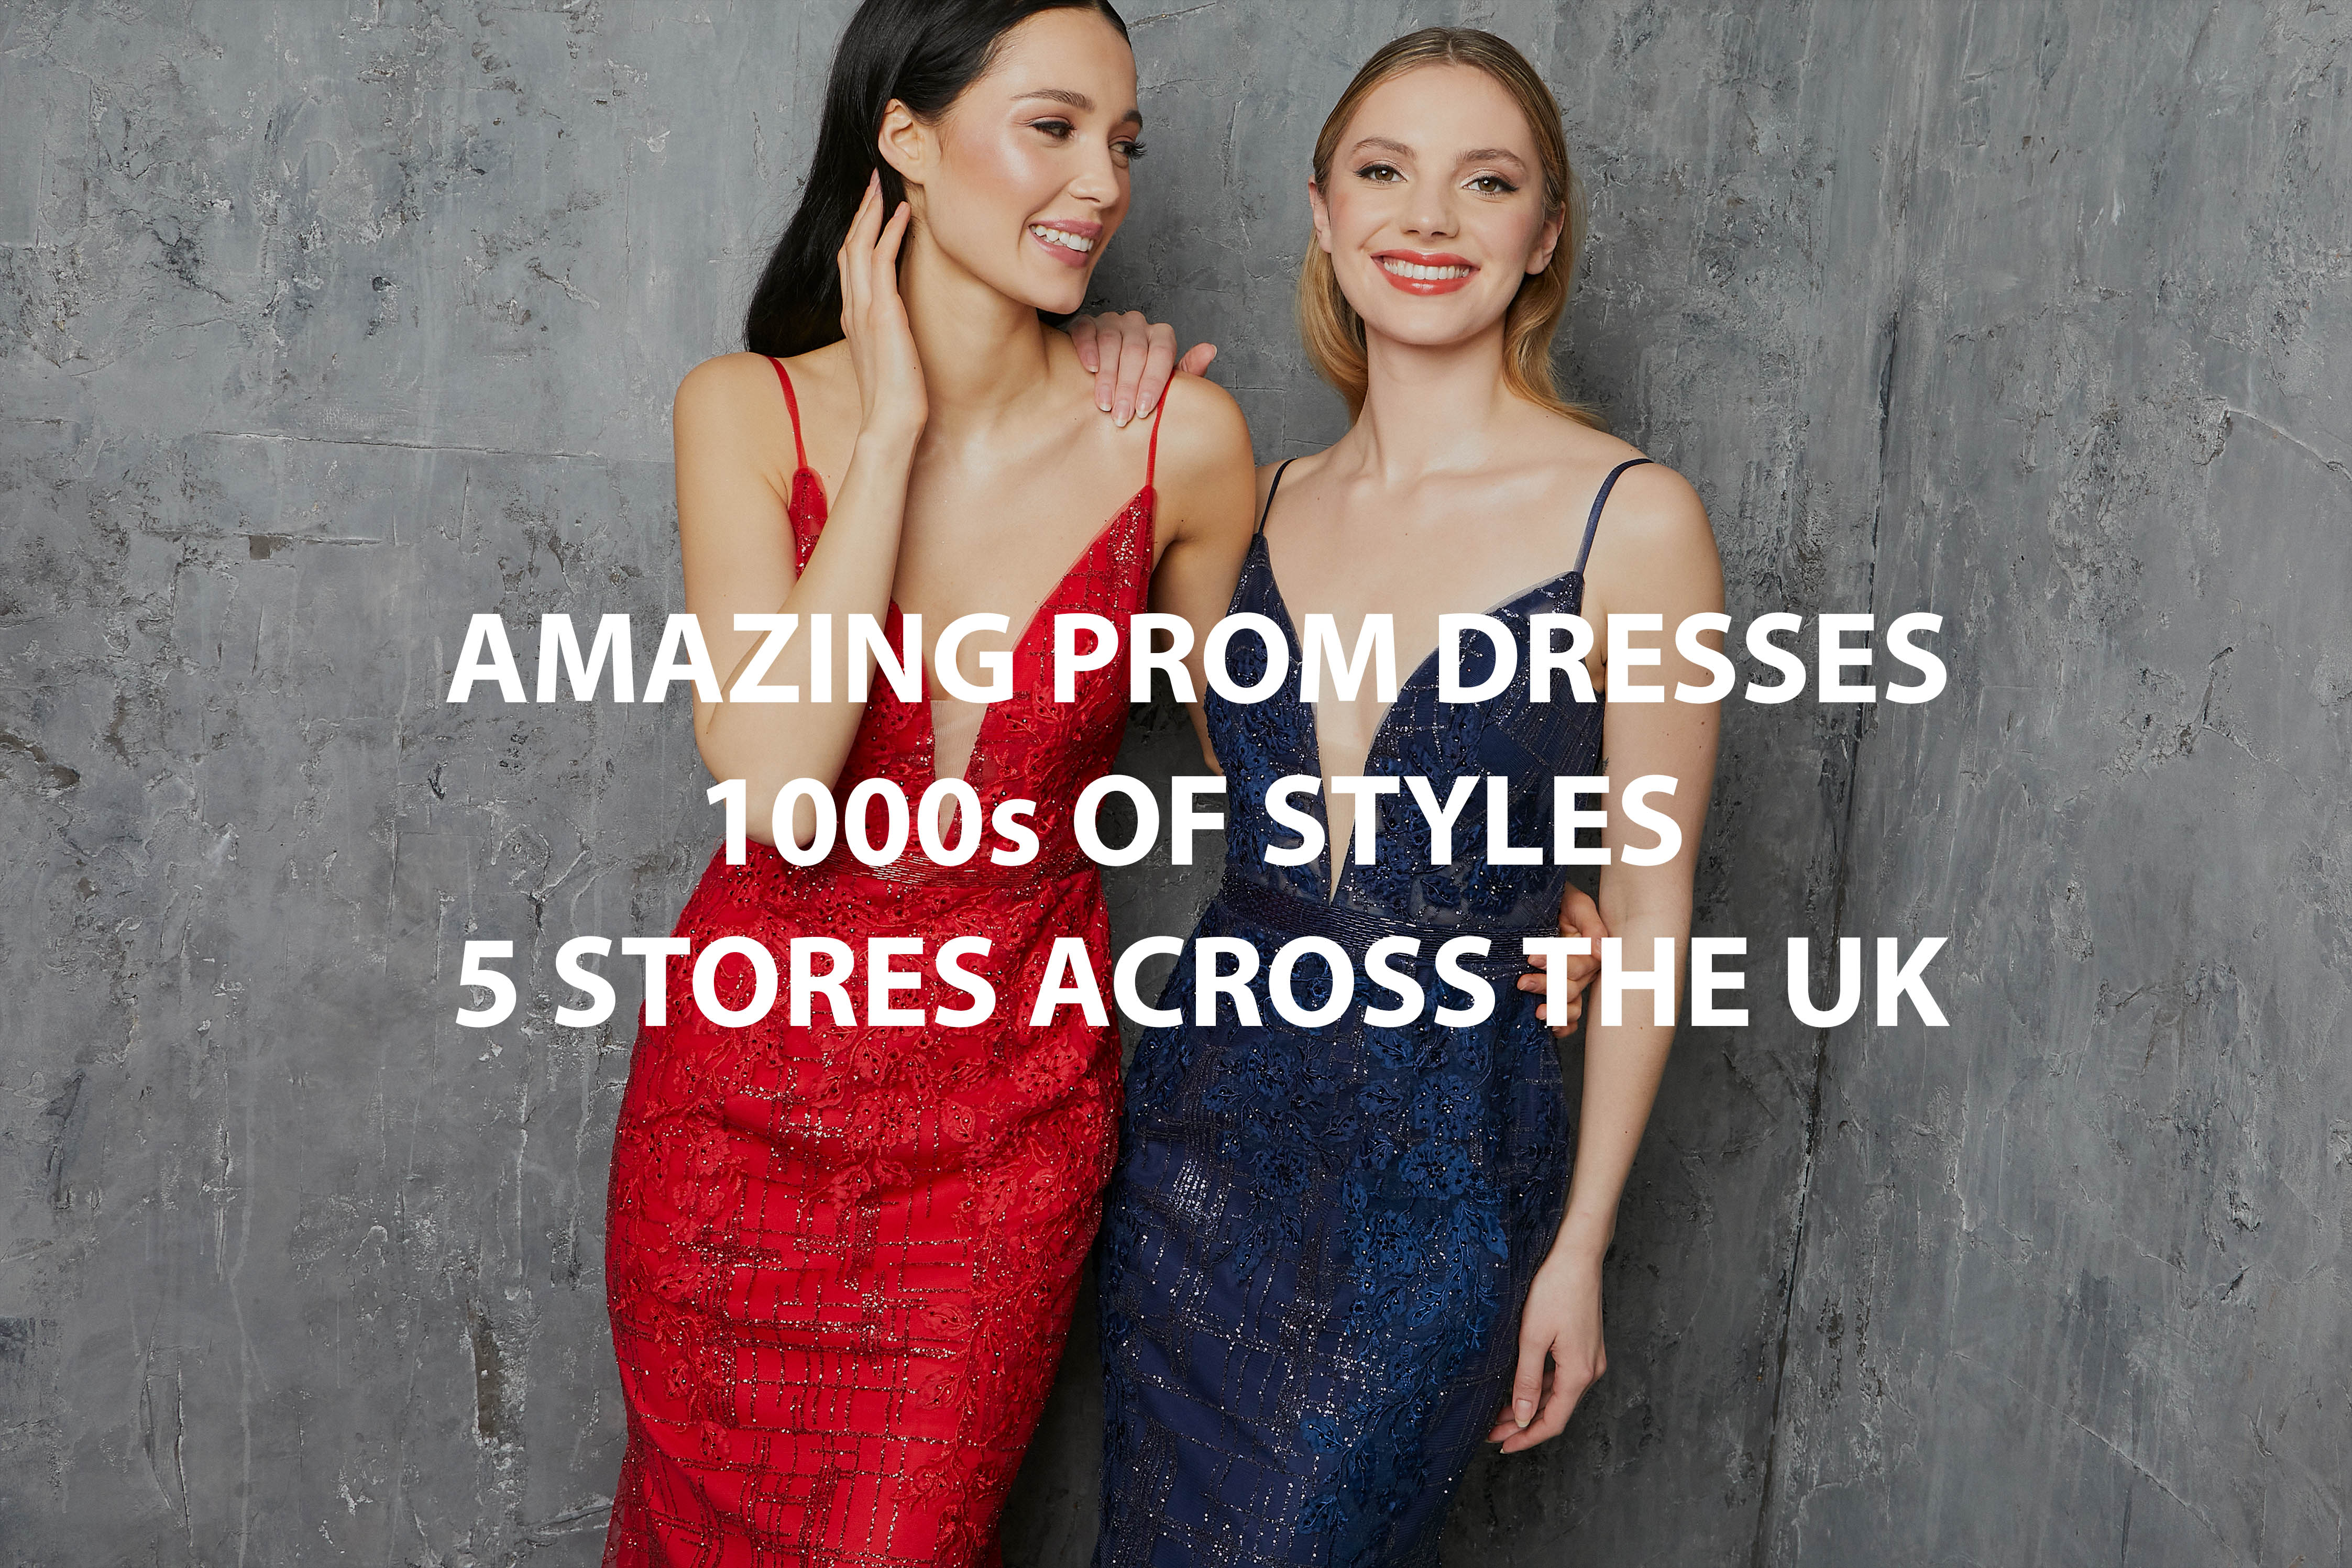 Prom dresses, Sweet 16, Cocktail, Formal gowns evening wear | Essex